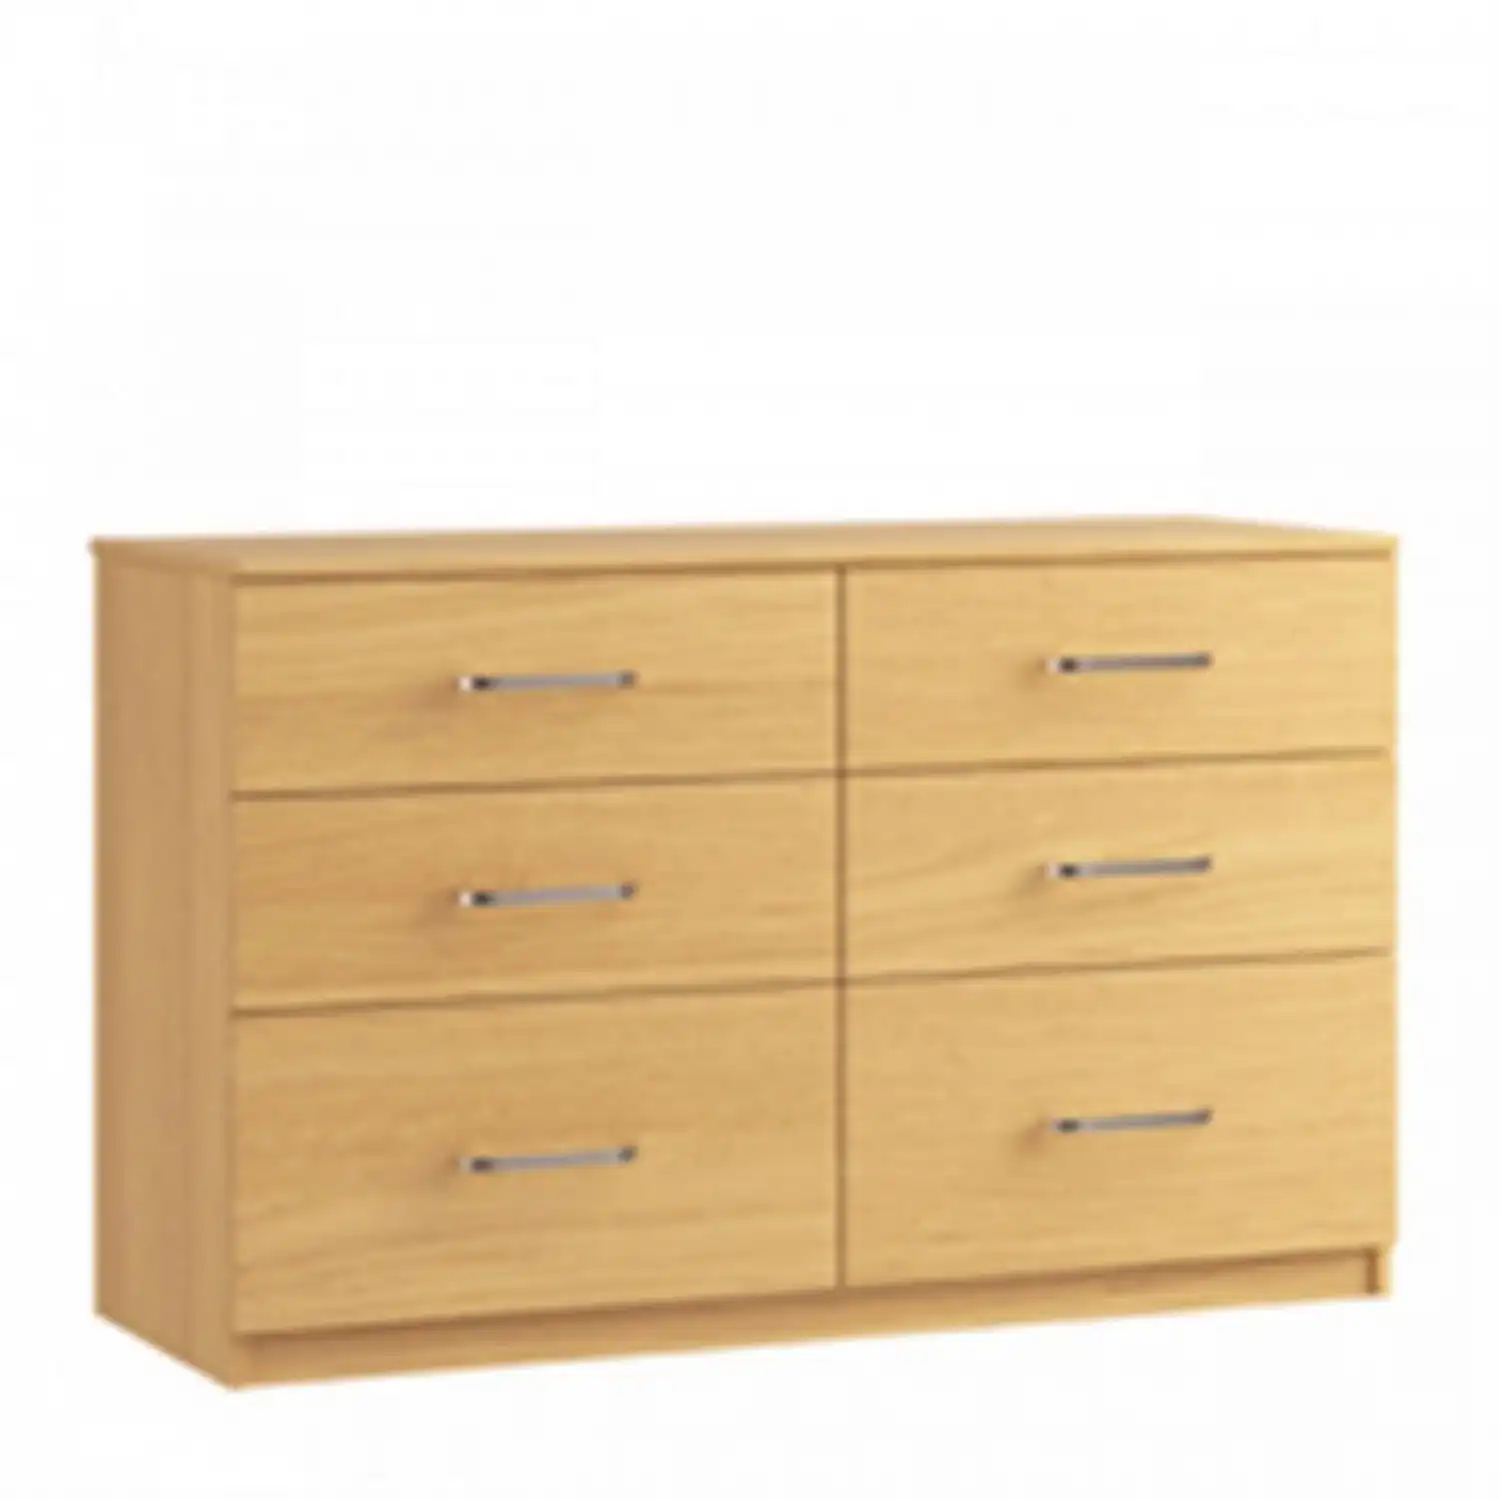 Ravelle 4 Colour 6 Drawer Twin Chest